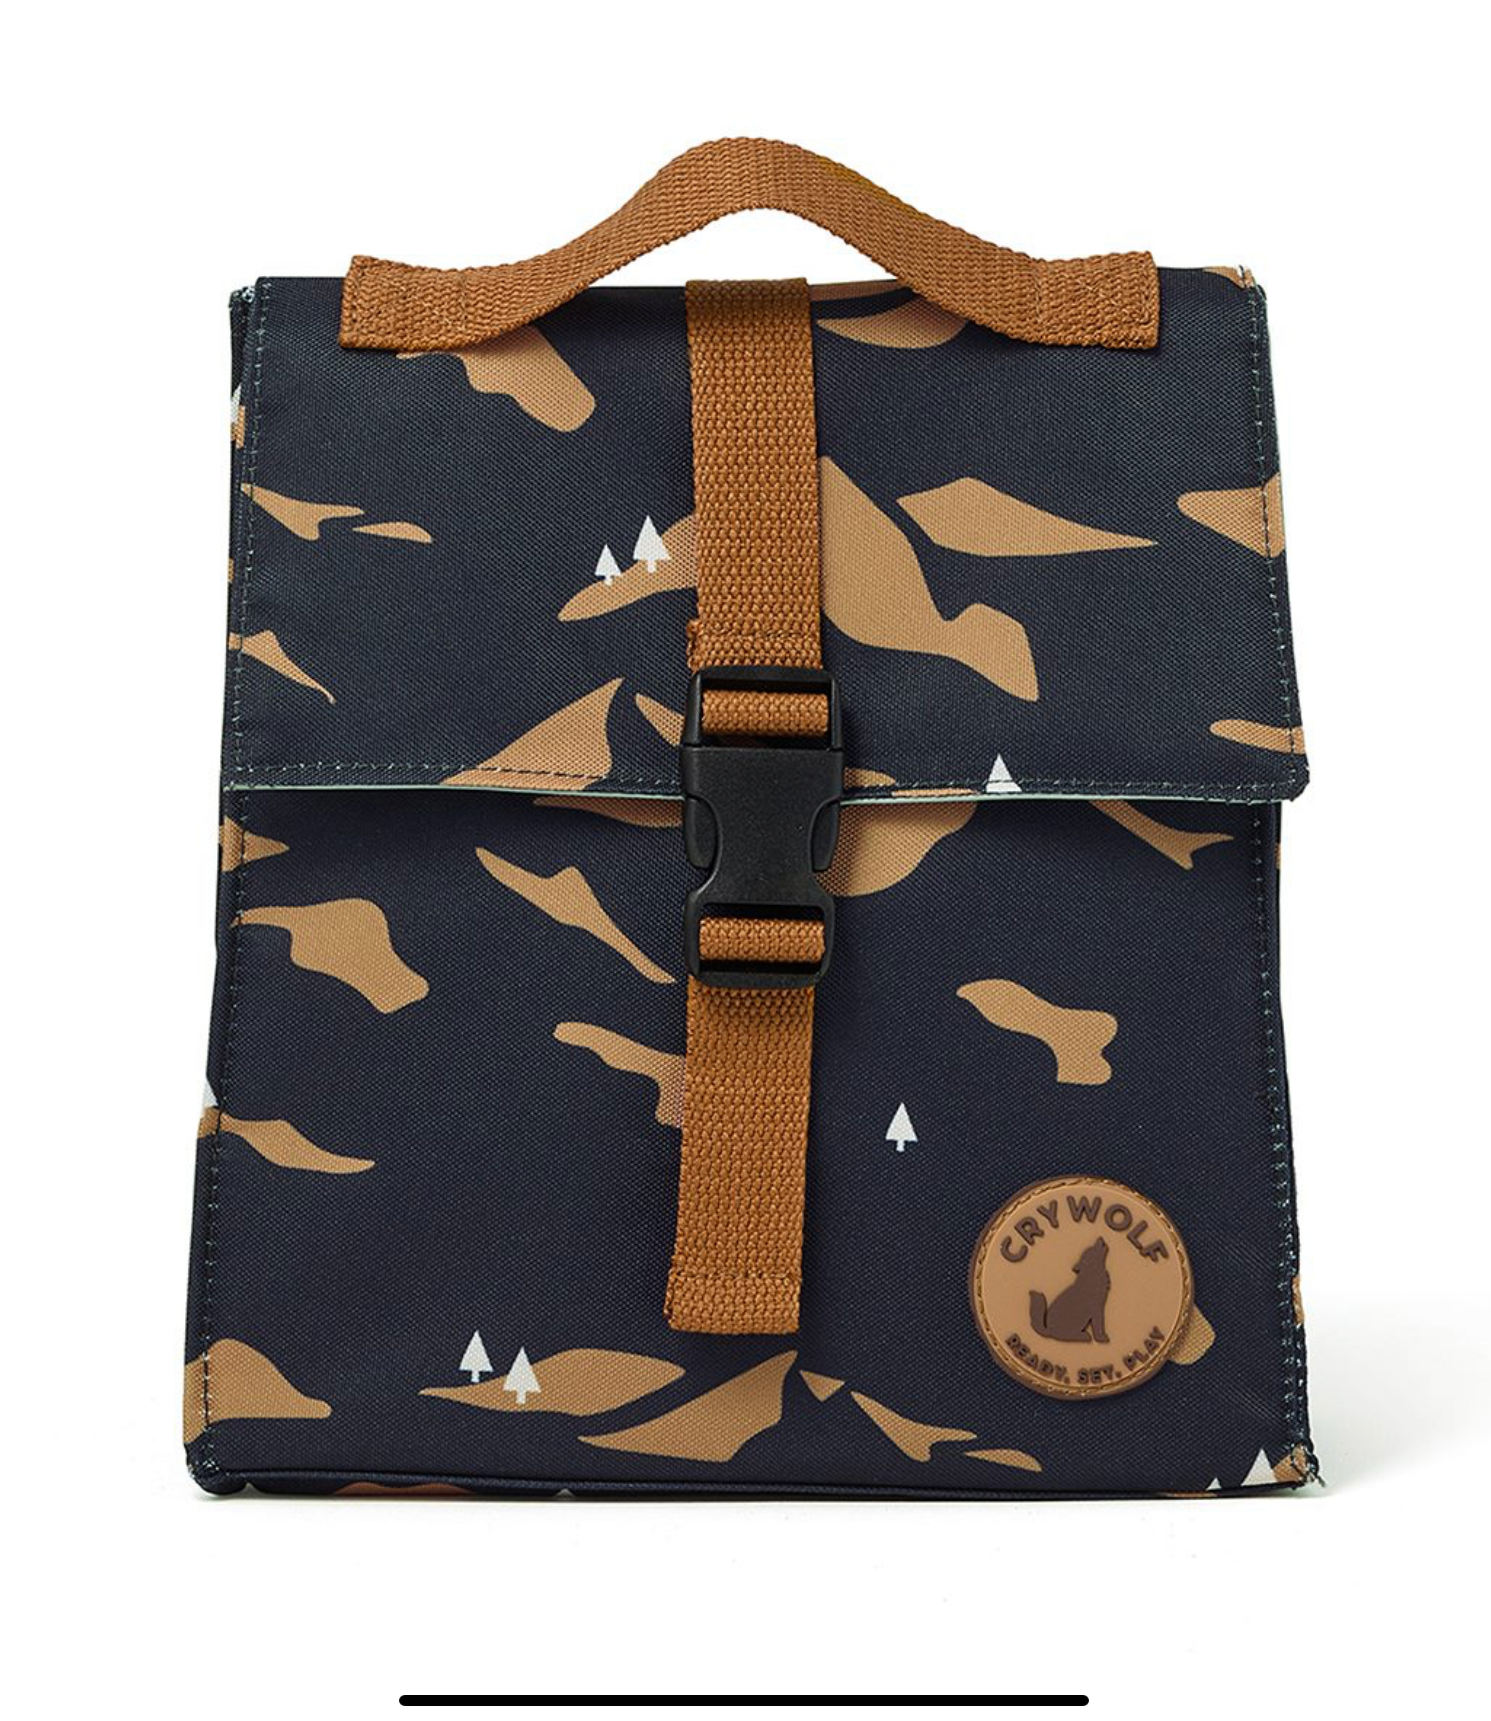 Crywolf Summer Range Insulated Lunch Bag Great Outdoors